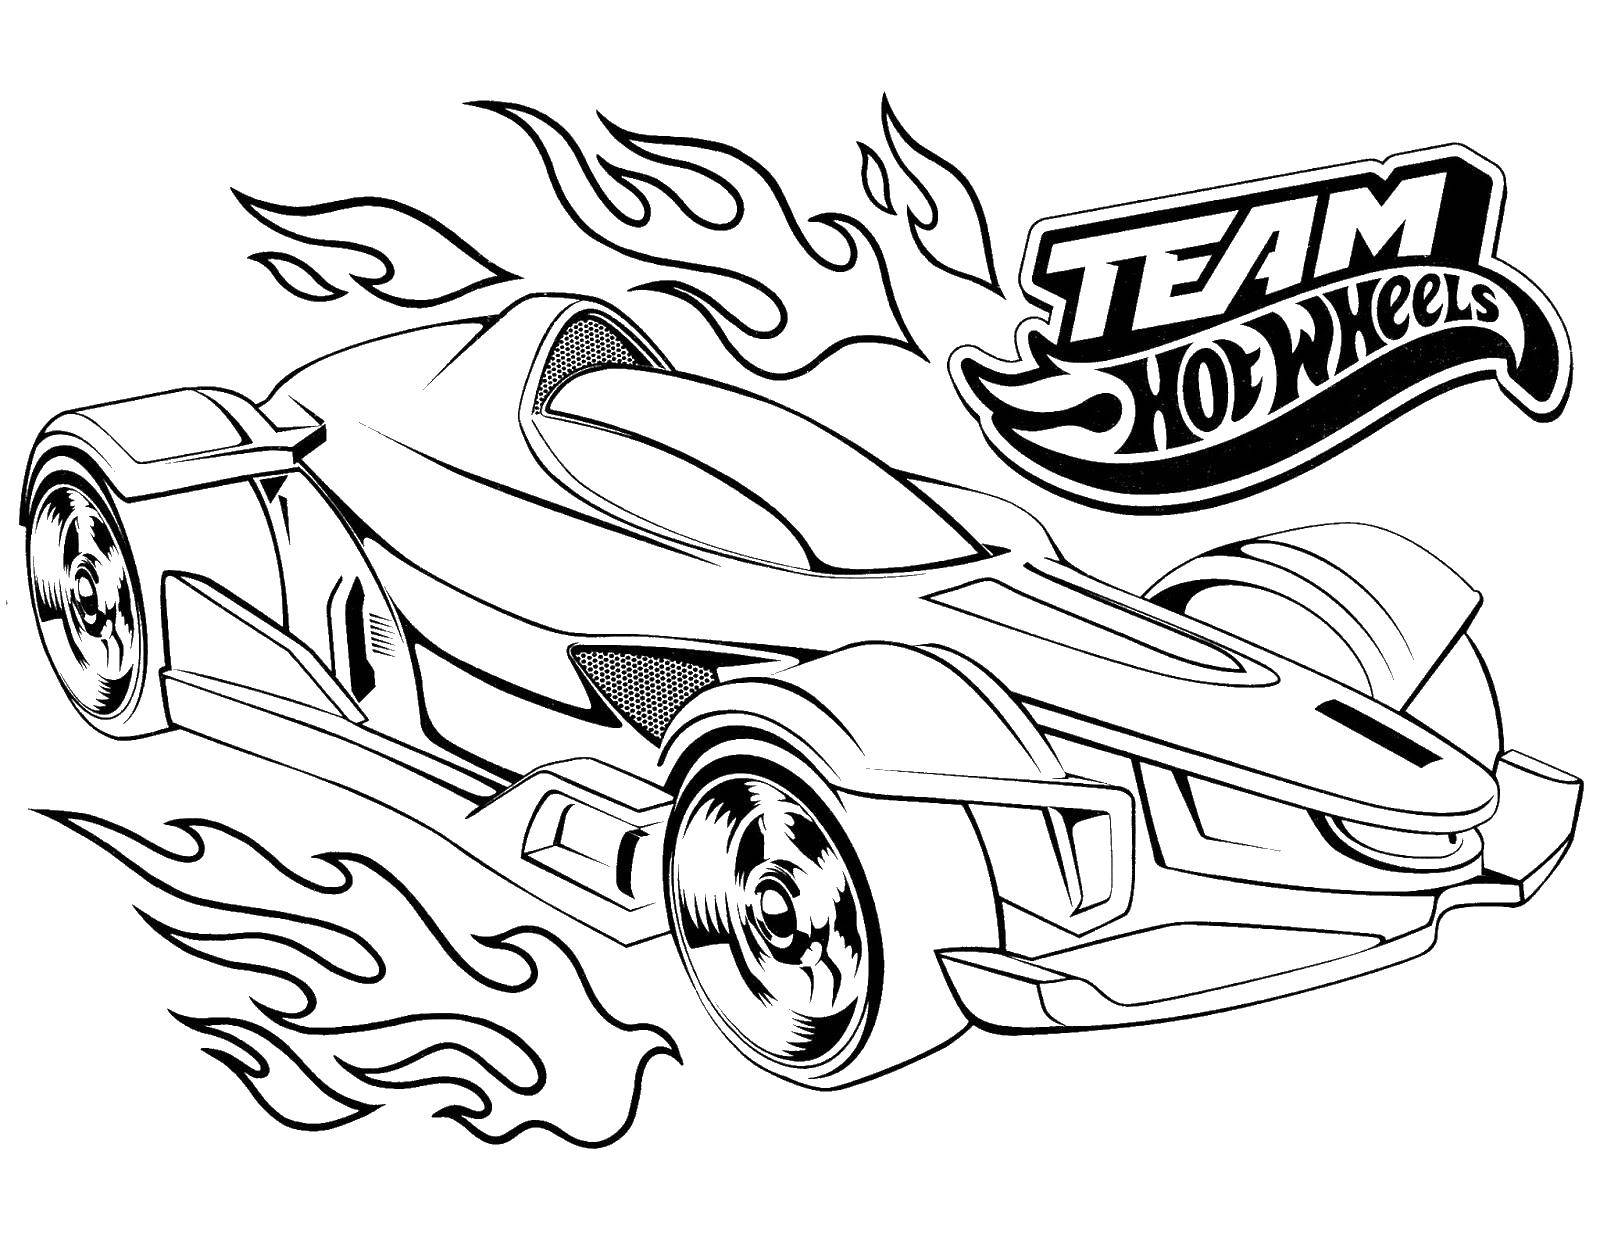 Coloring Race car. Category Machine . Tags:  Transport, car.